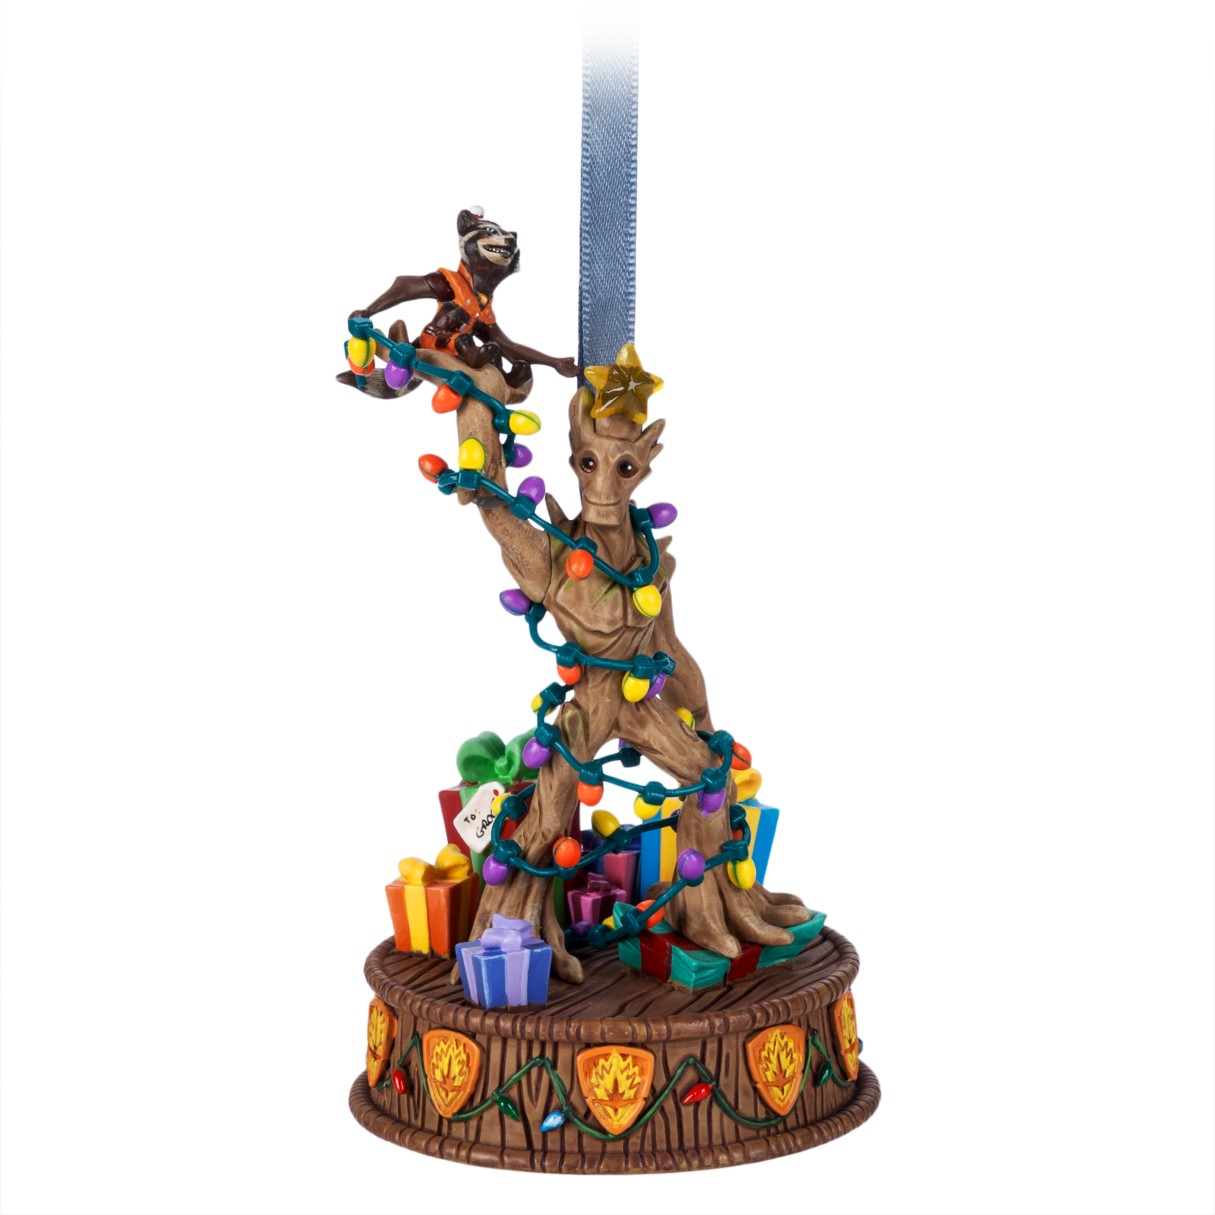 Rocket and Groot Light-Up Living Magic Sketchbook Ornament – Guardians of the Galaxy